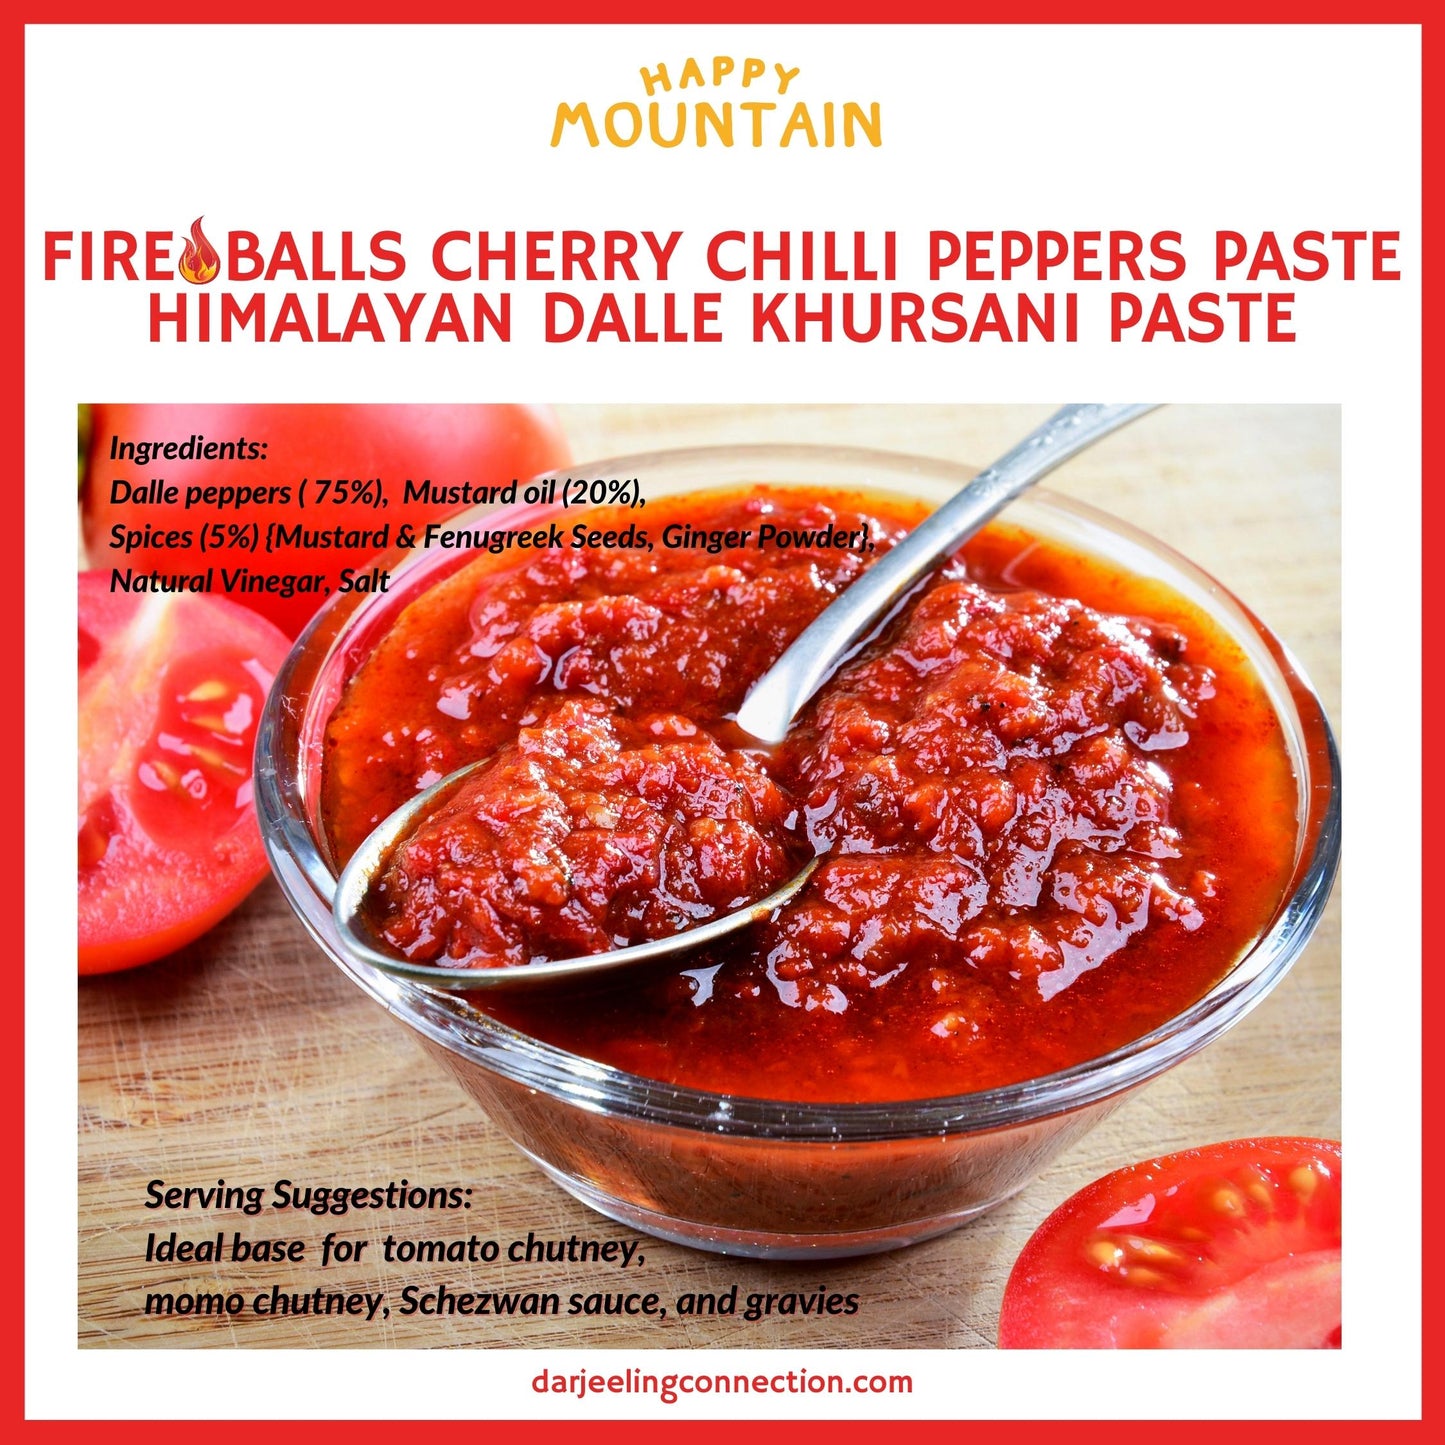 Ingredients Used in Fireballs - Cherry Chilli Peppers (Dalle) Paste - Happy Mountain